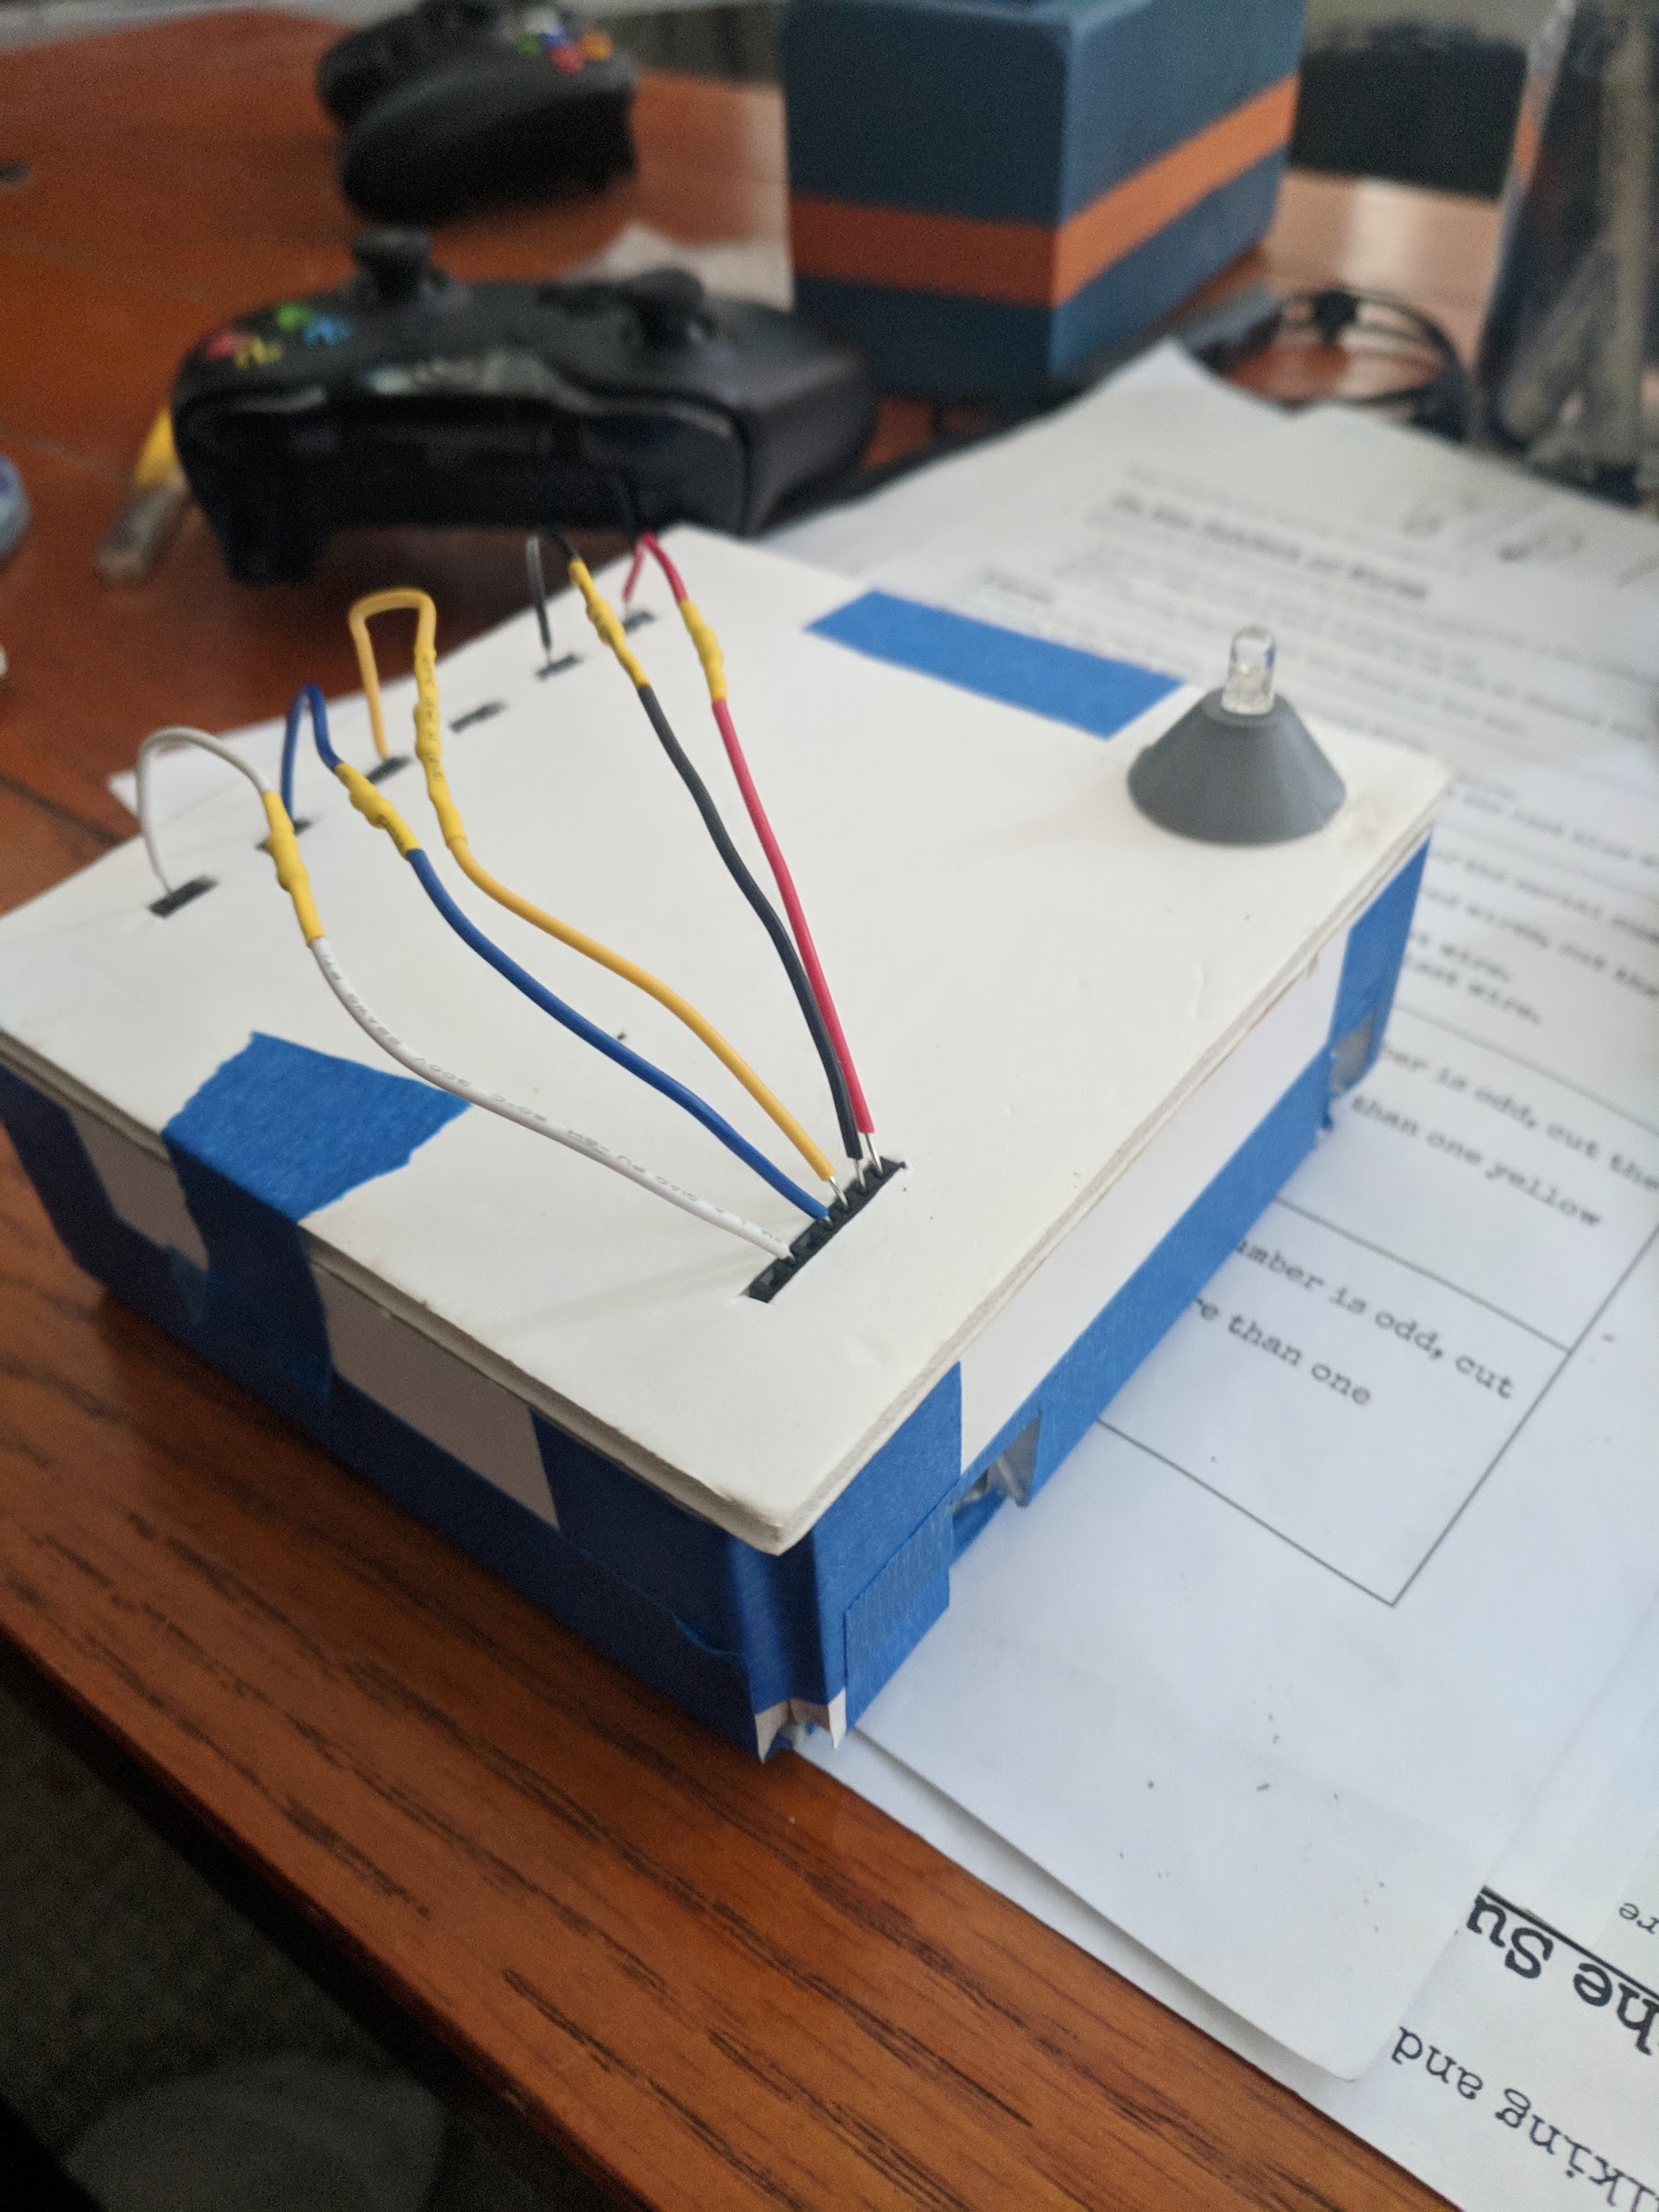 First iteration of the wires module